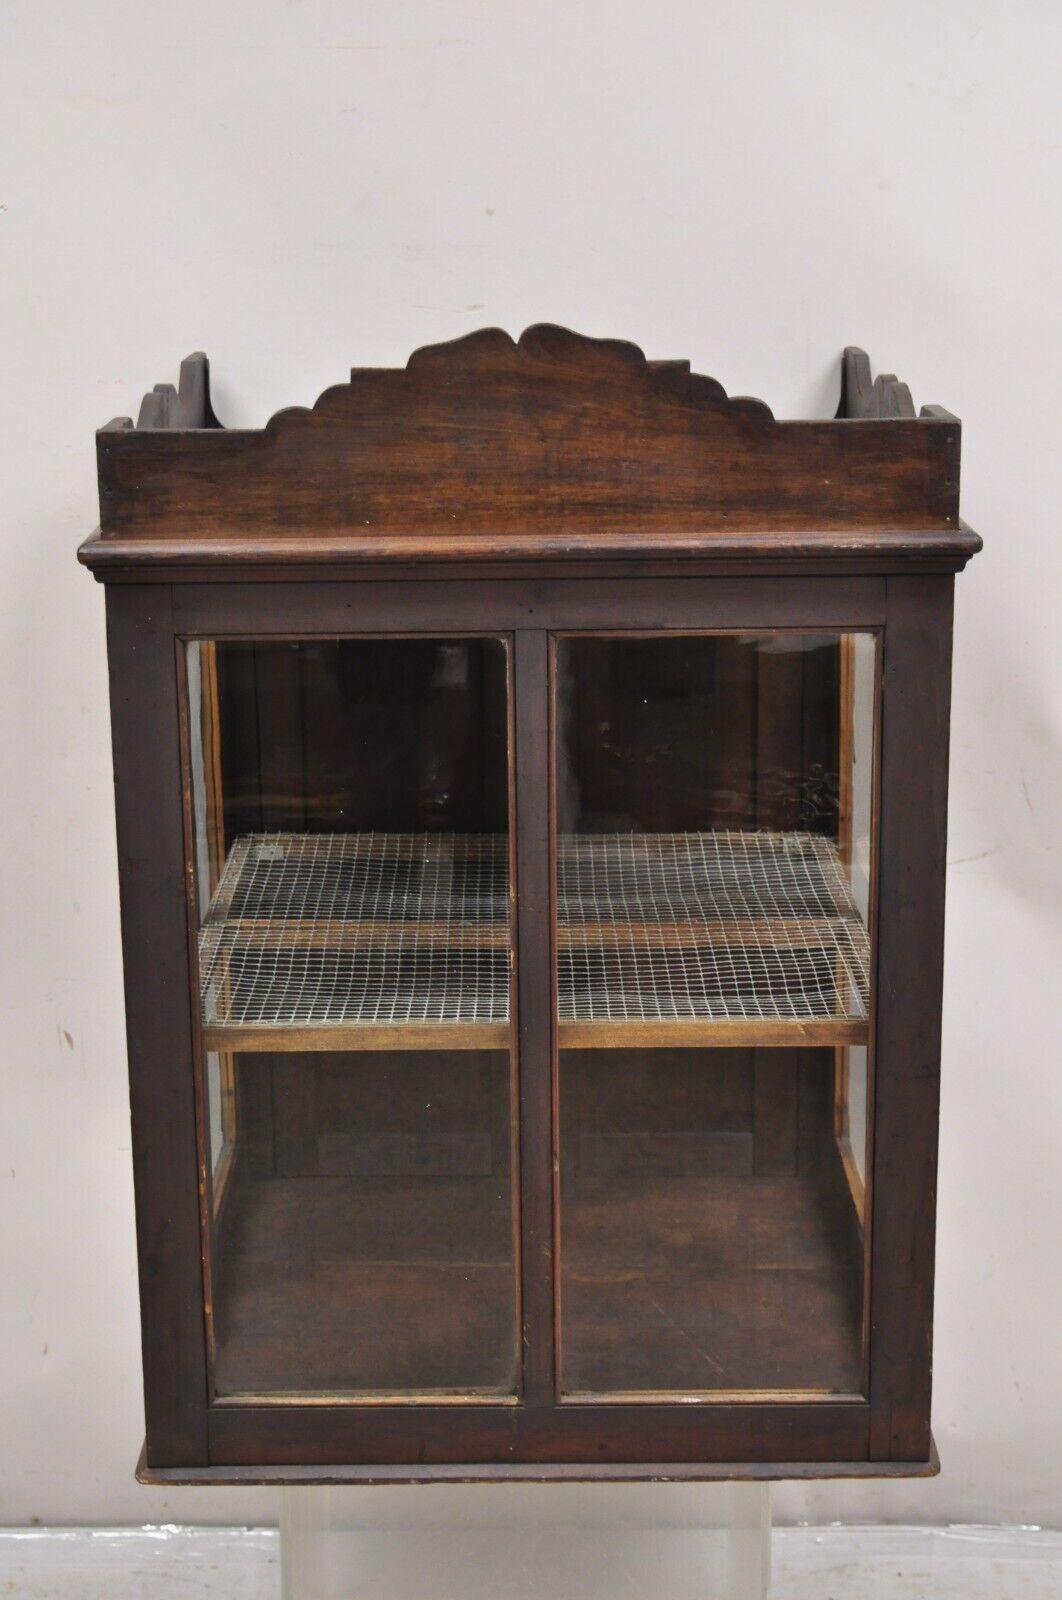 Antique Pine Wood & Glass Counter Top Display County Store Pie Safe Display Cabinet. Item featured is a nice larger size, rear entry with 2 swing doors and latch, single interior chicken wire shelf, glass display on 3 sides, very nice antique item.